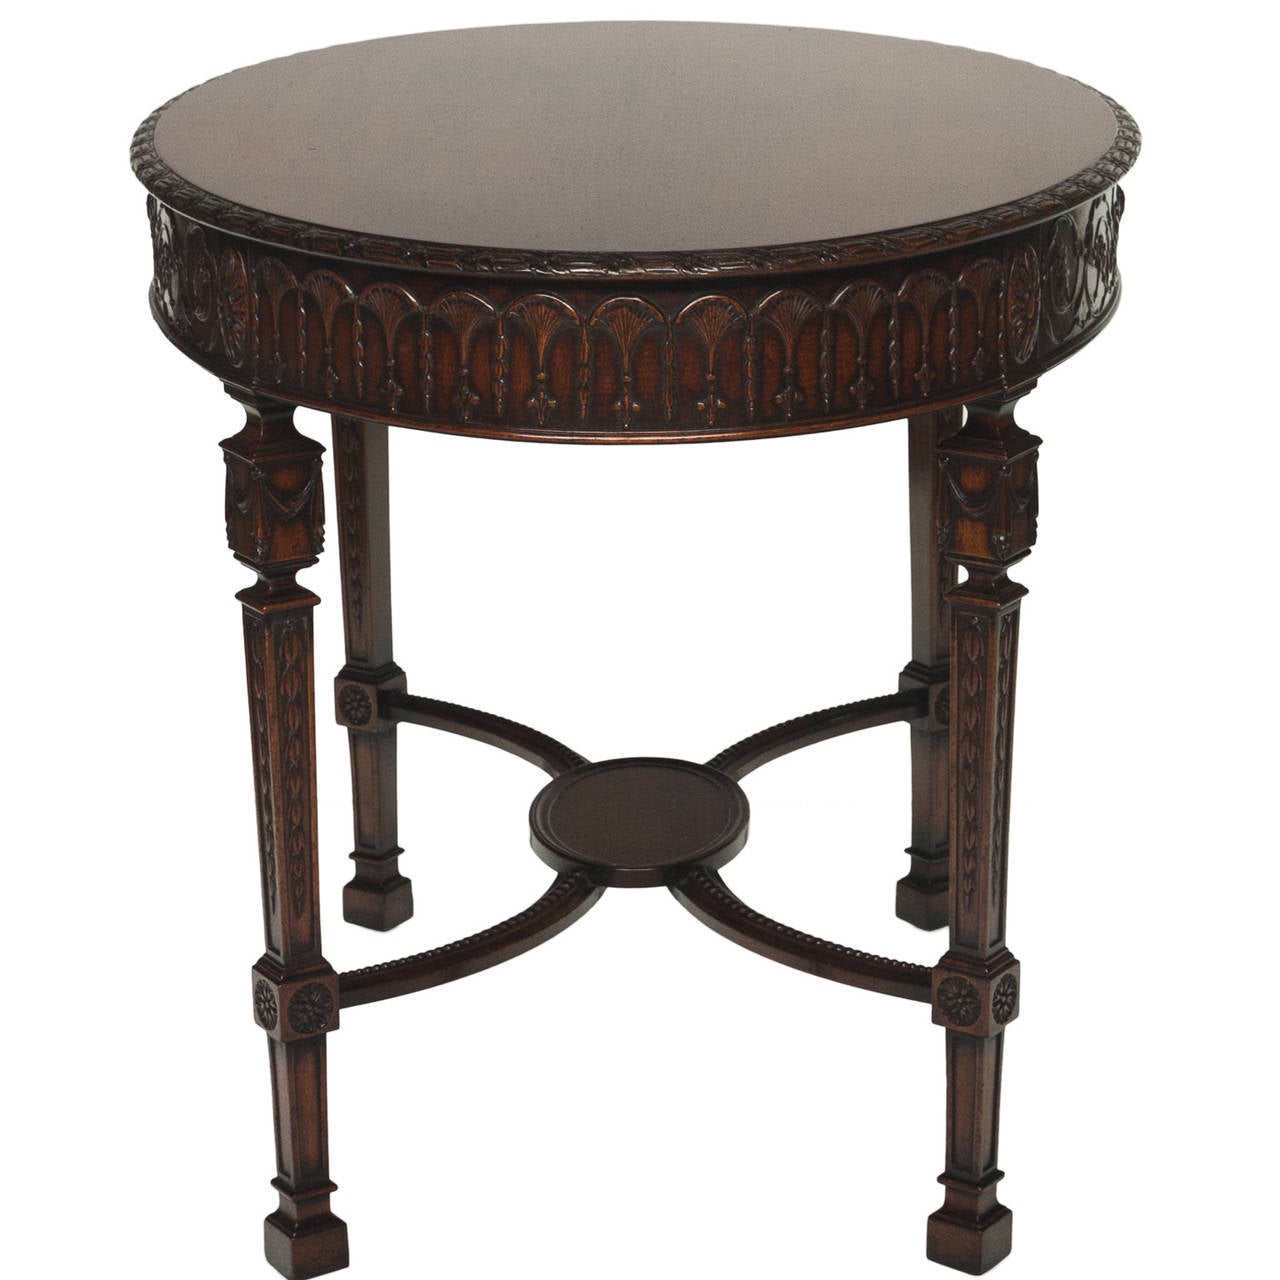 19th Century Oval Sheraton Style Centre Table 1